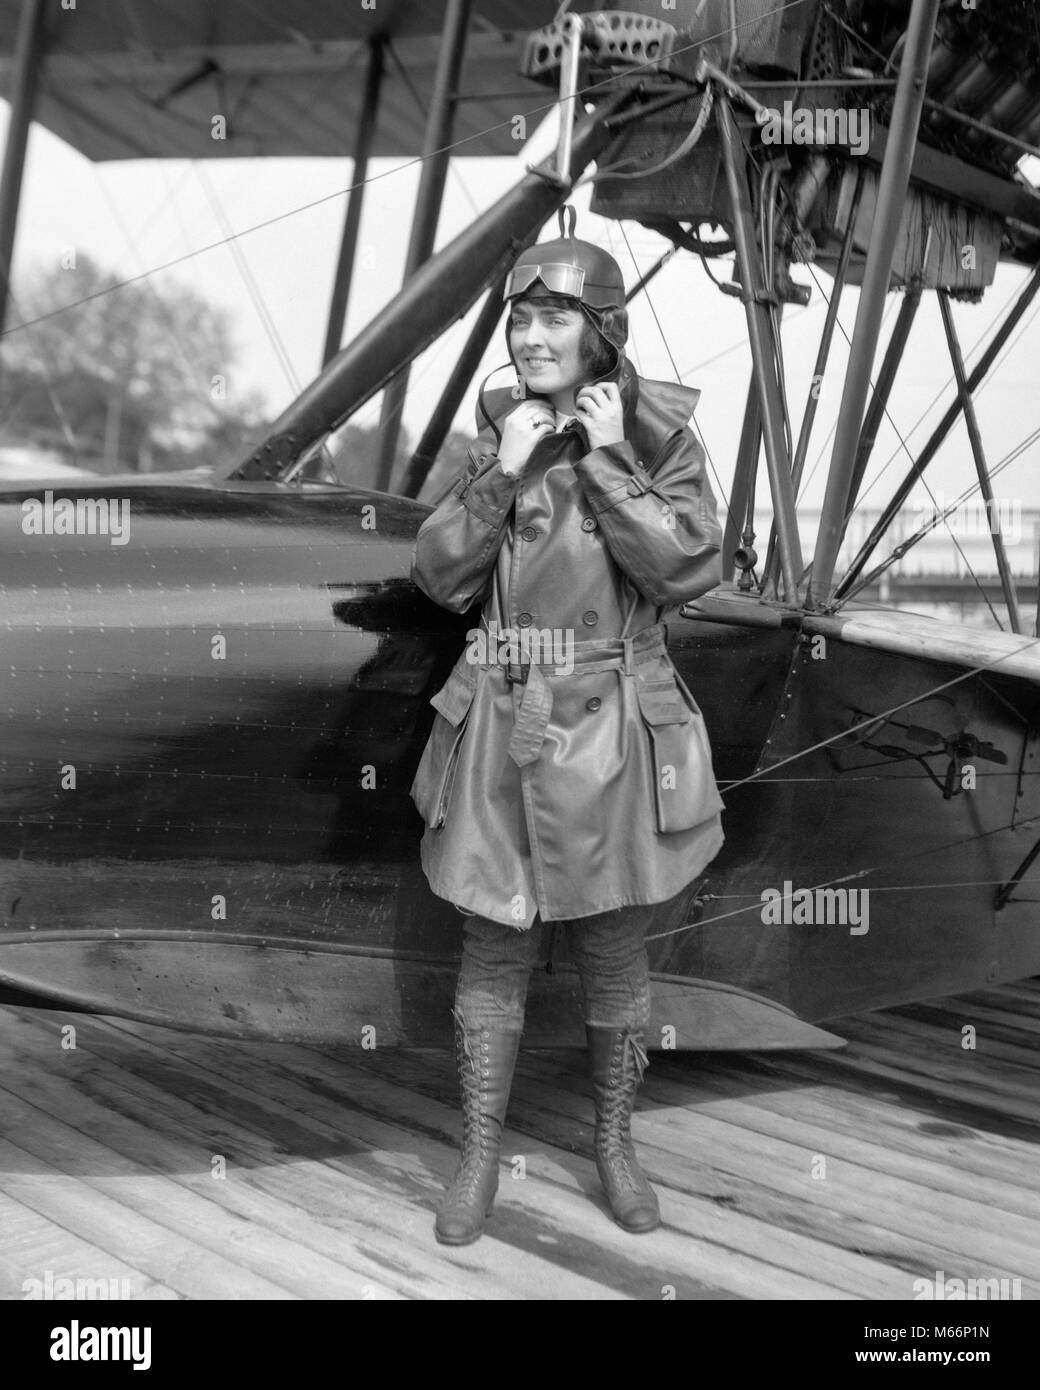 1920s FEMALE AVIATOR AVIATRIX LEATHER COAT CAP WITH GOGGLES AND LACE UP BOOTS PREPARING TO BOARD SEAPLANE - o3255 HAR001 HARS ONE PERSON ONLY PREPARING COPY SPACE FULL-LENGTH LADIES INSPIRATION GOGGLES RISK CONFIDENCE TRANSPORTATION NOSTALGIA 20-25 YEARS 25-30 YEARS FREEDOM PIONEER HAPPINESS CHEERFUL ADVENTURE COURAGE AND EXCITEMENT LEADERSHIP PROGRESS INNOVATION AVIATION SMILES FASHIONS AVIATOR AVIATRIX PIONEERING YOUNG ADULT WOMAN AIRPLANES B&W BLACK AND WHITE BRAVE CAUCASIAN ETHNICITY CIVILIAN COURAGEOUS DARING FEMINIST LACE UP OCCUPATIONS OLD FASHIONED PERSONS SEAPLANE Stock Photo